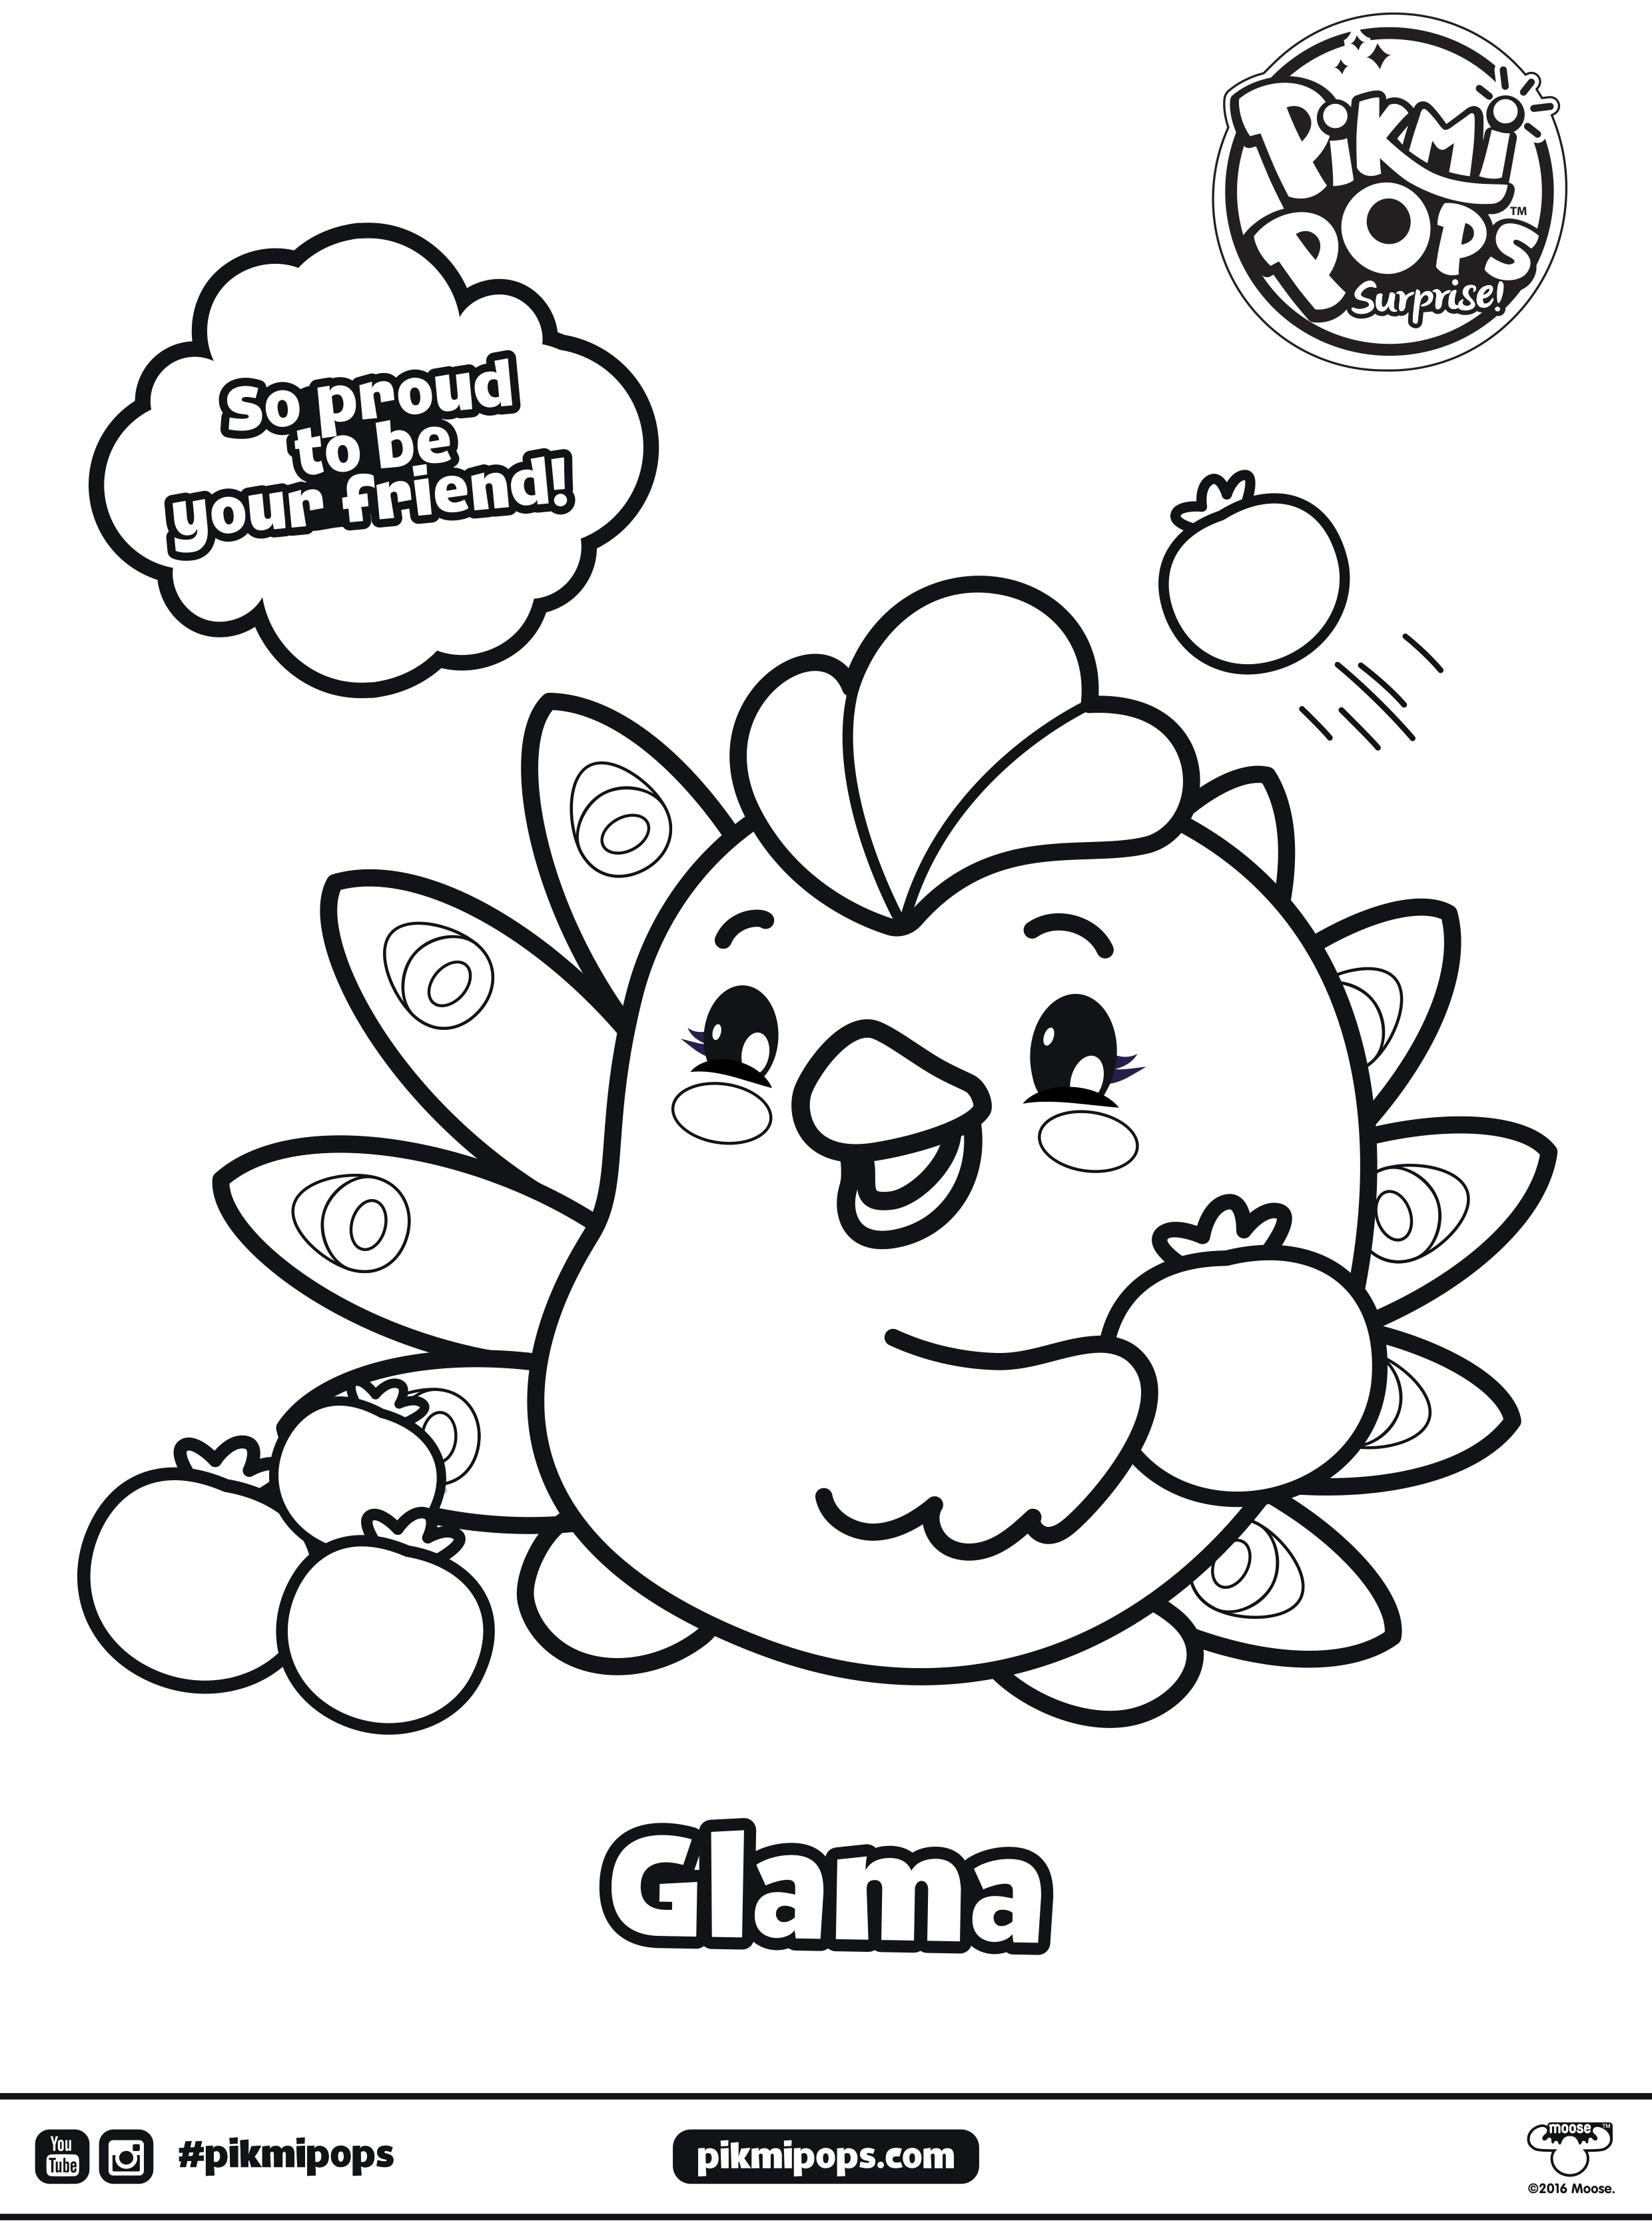 Download fun activities and color ins to print out and play with Pikmi ...